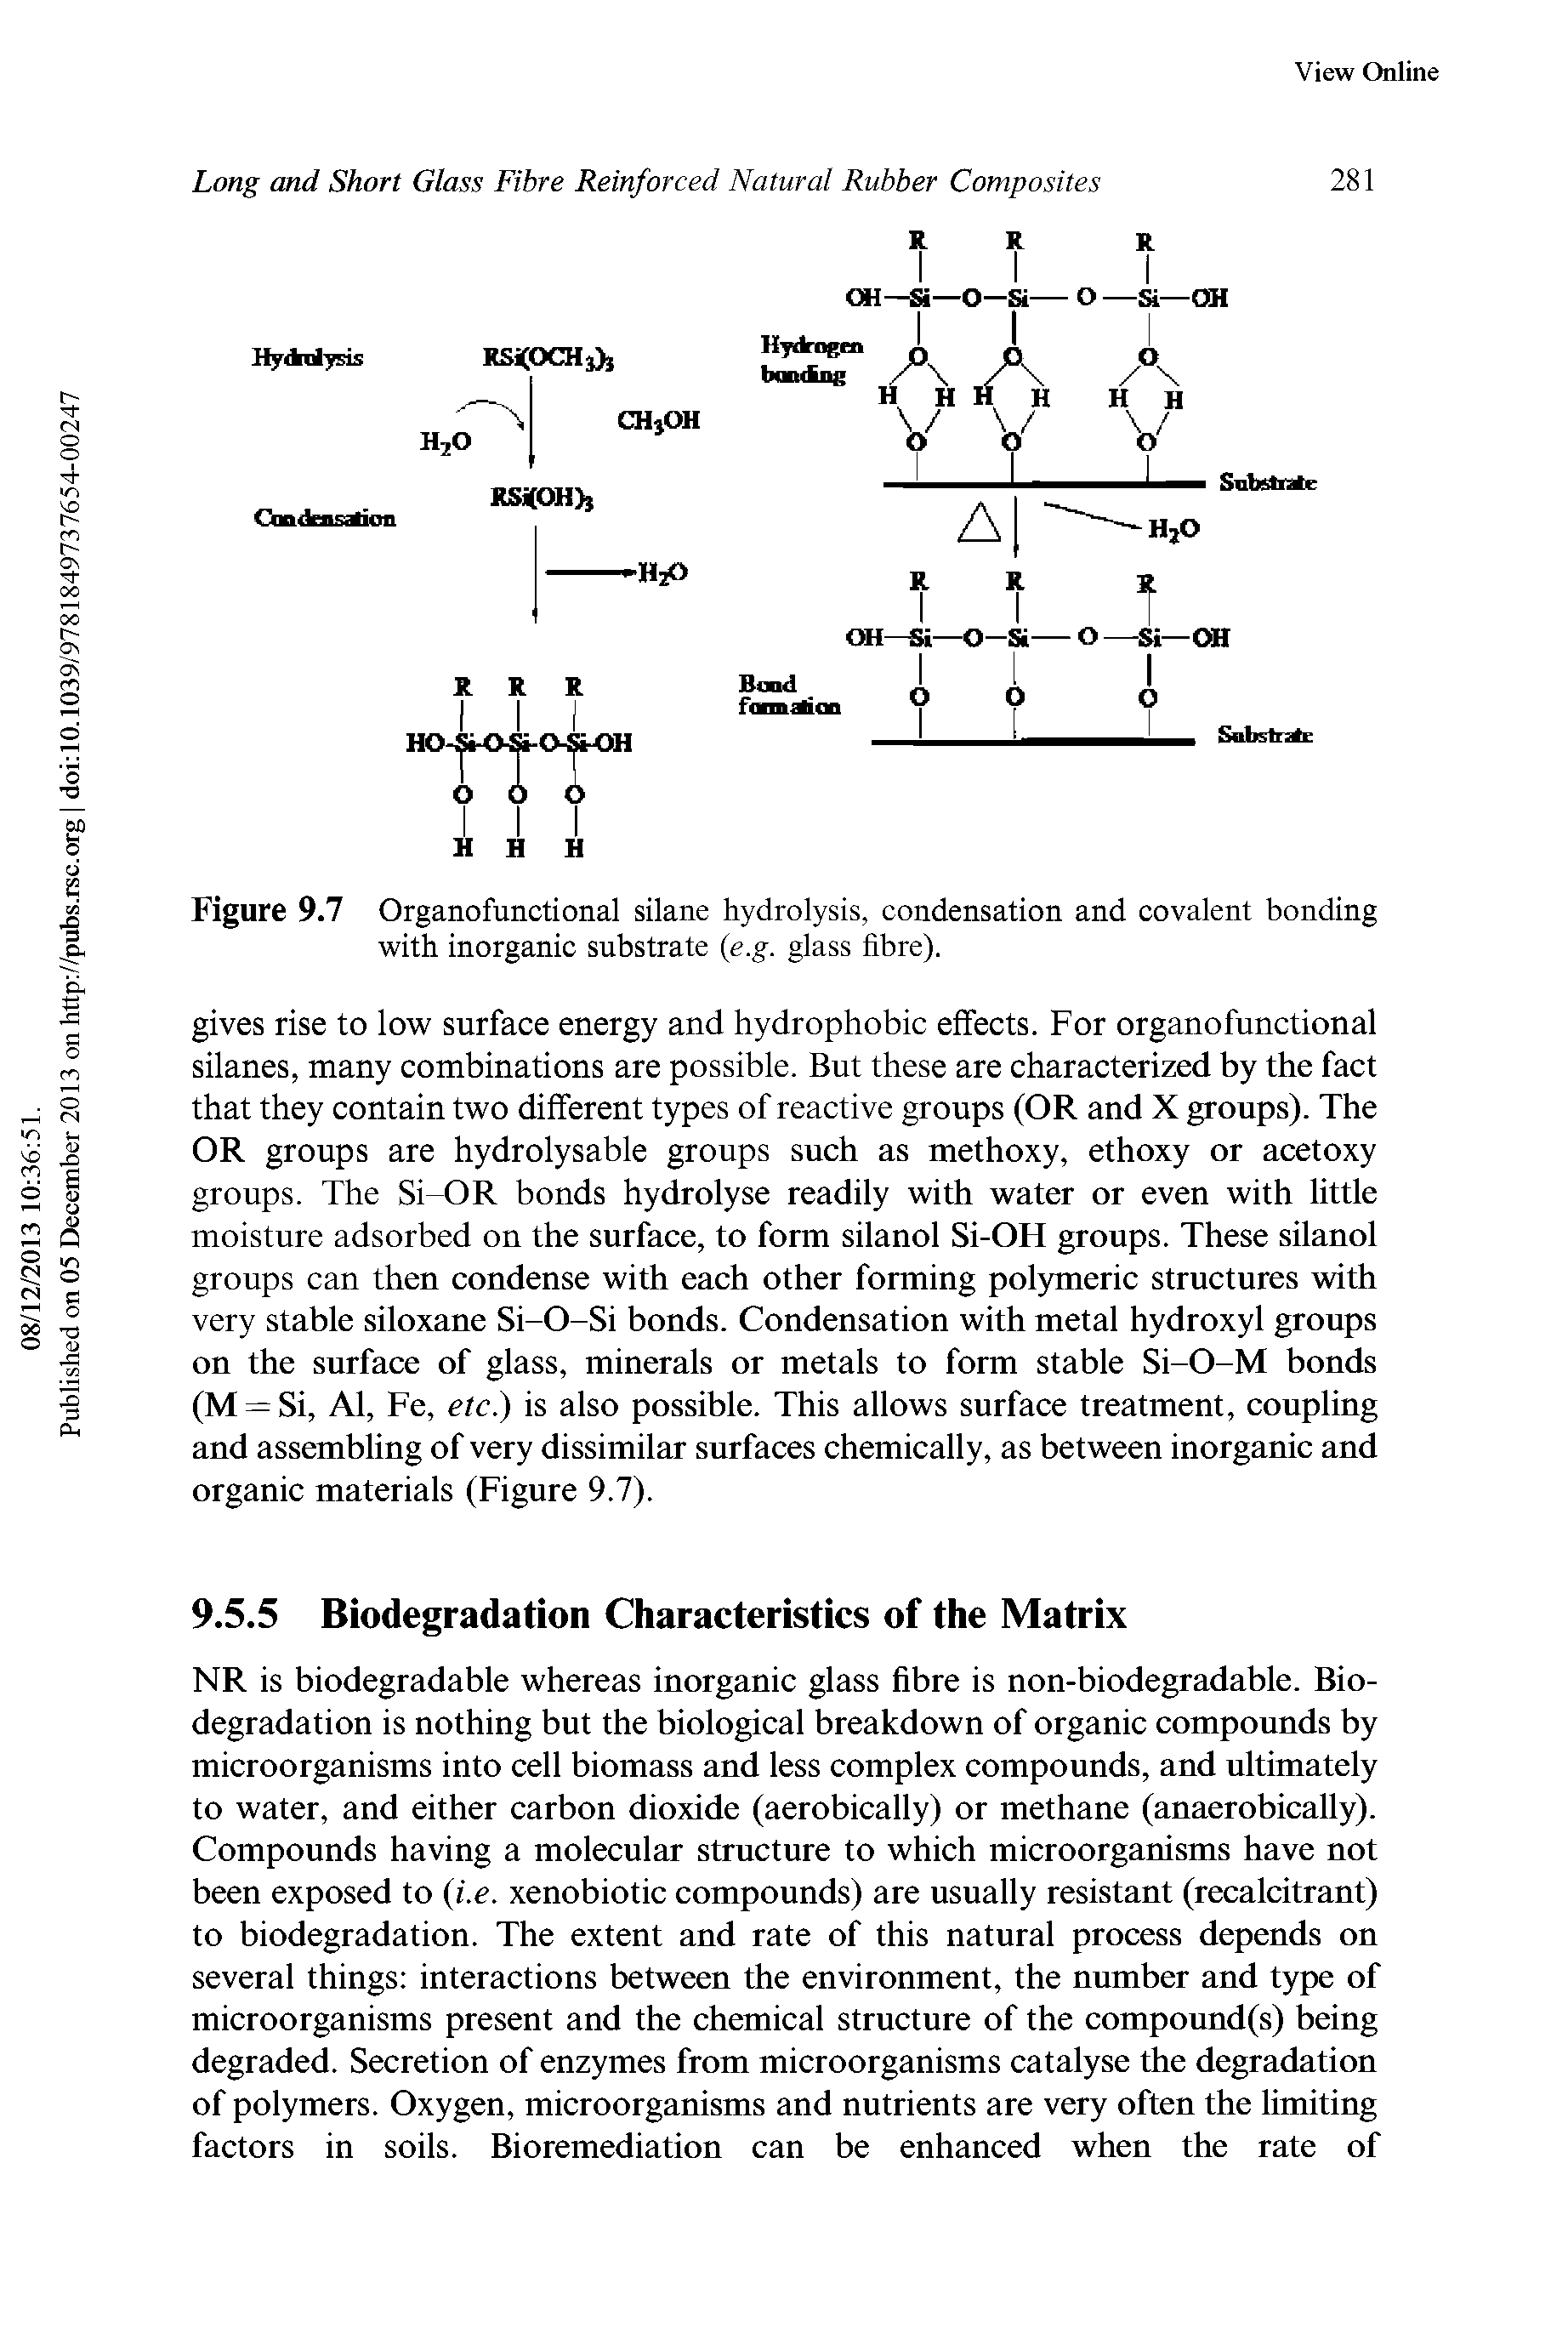 Figure 9.7 Organofunctional silane hydrolysis, condensation and covalent bonding with inorganic substrate e.g. glass fibre).